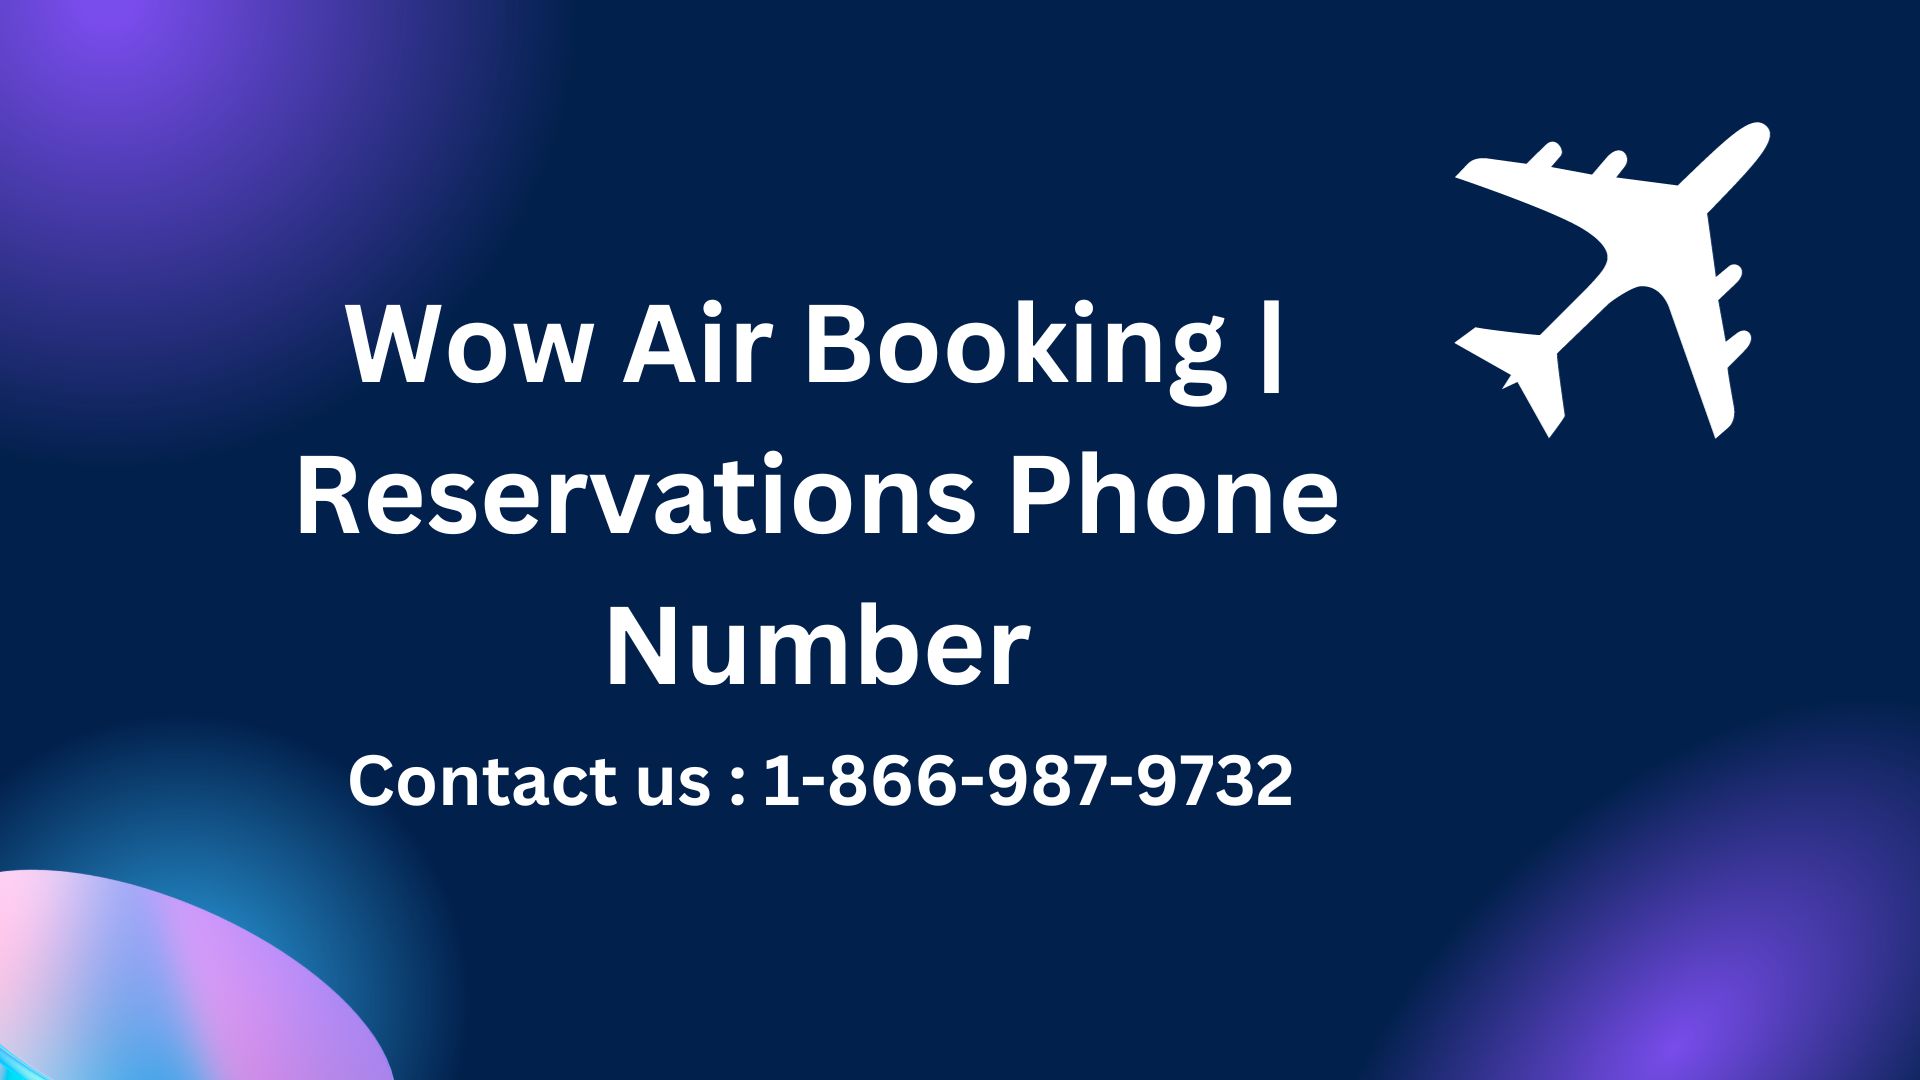 Wow Air Booking | Reservations Phone Number